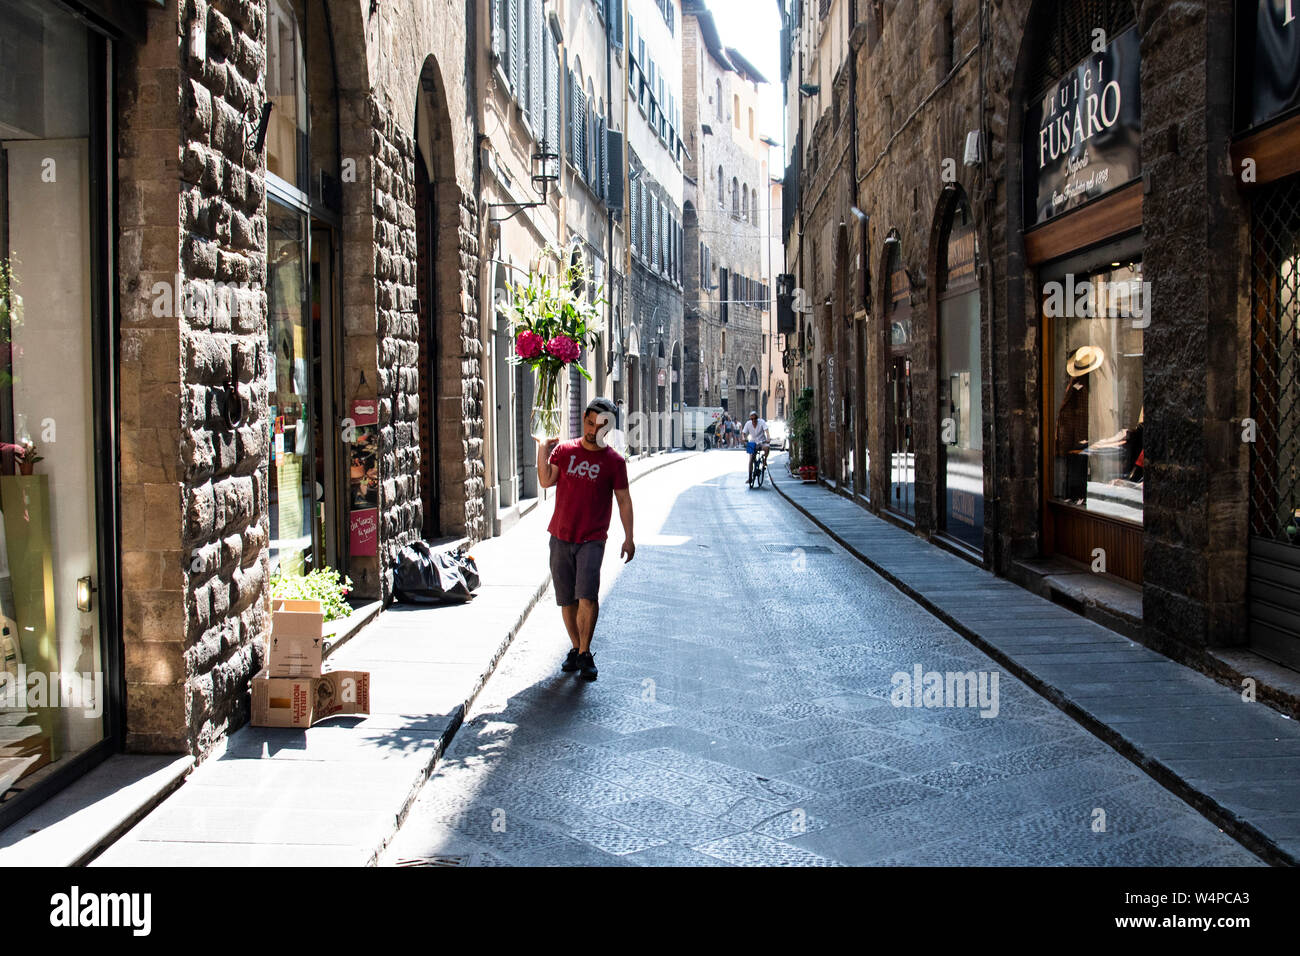 Man carries a vase filled with flesh flowers through a street in Florence, Italy Stock Photo